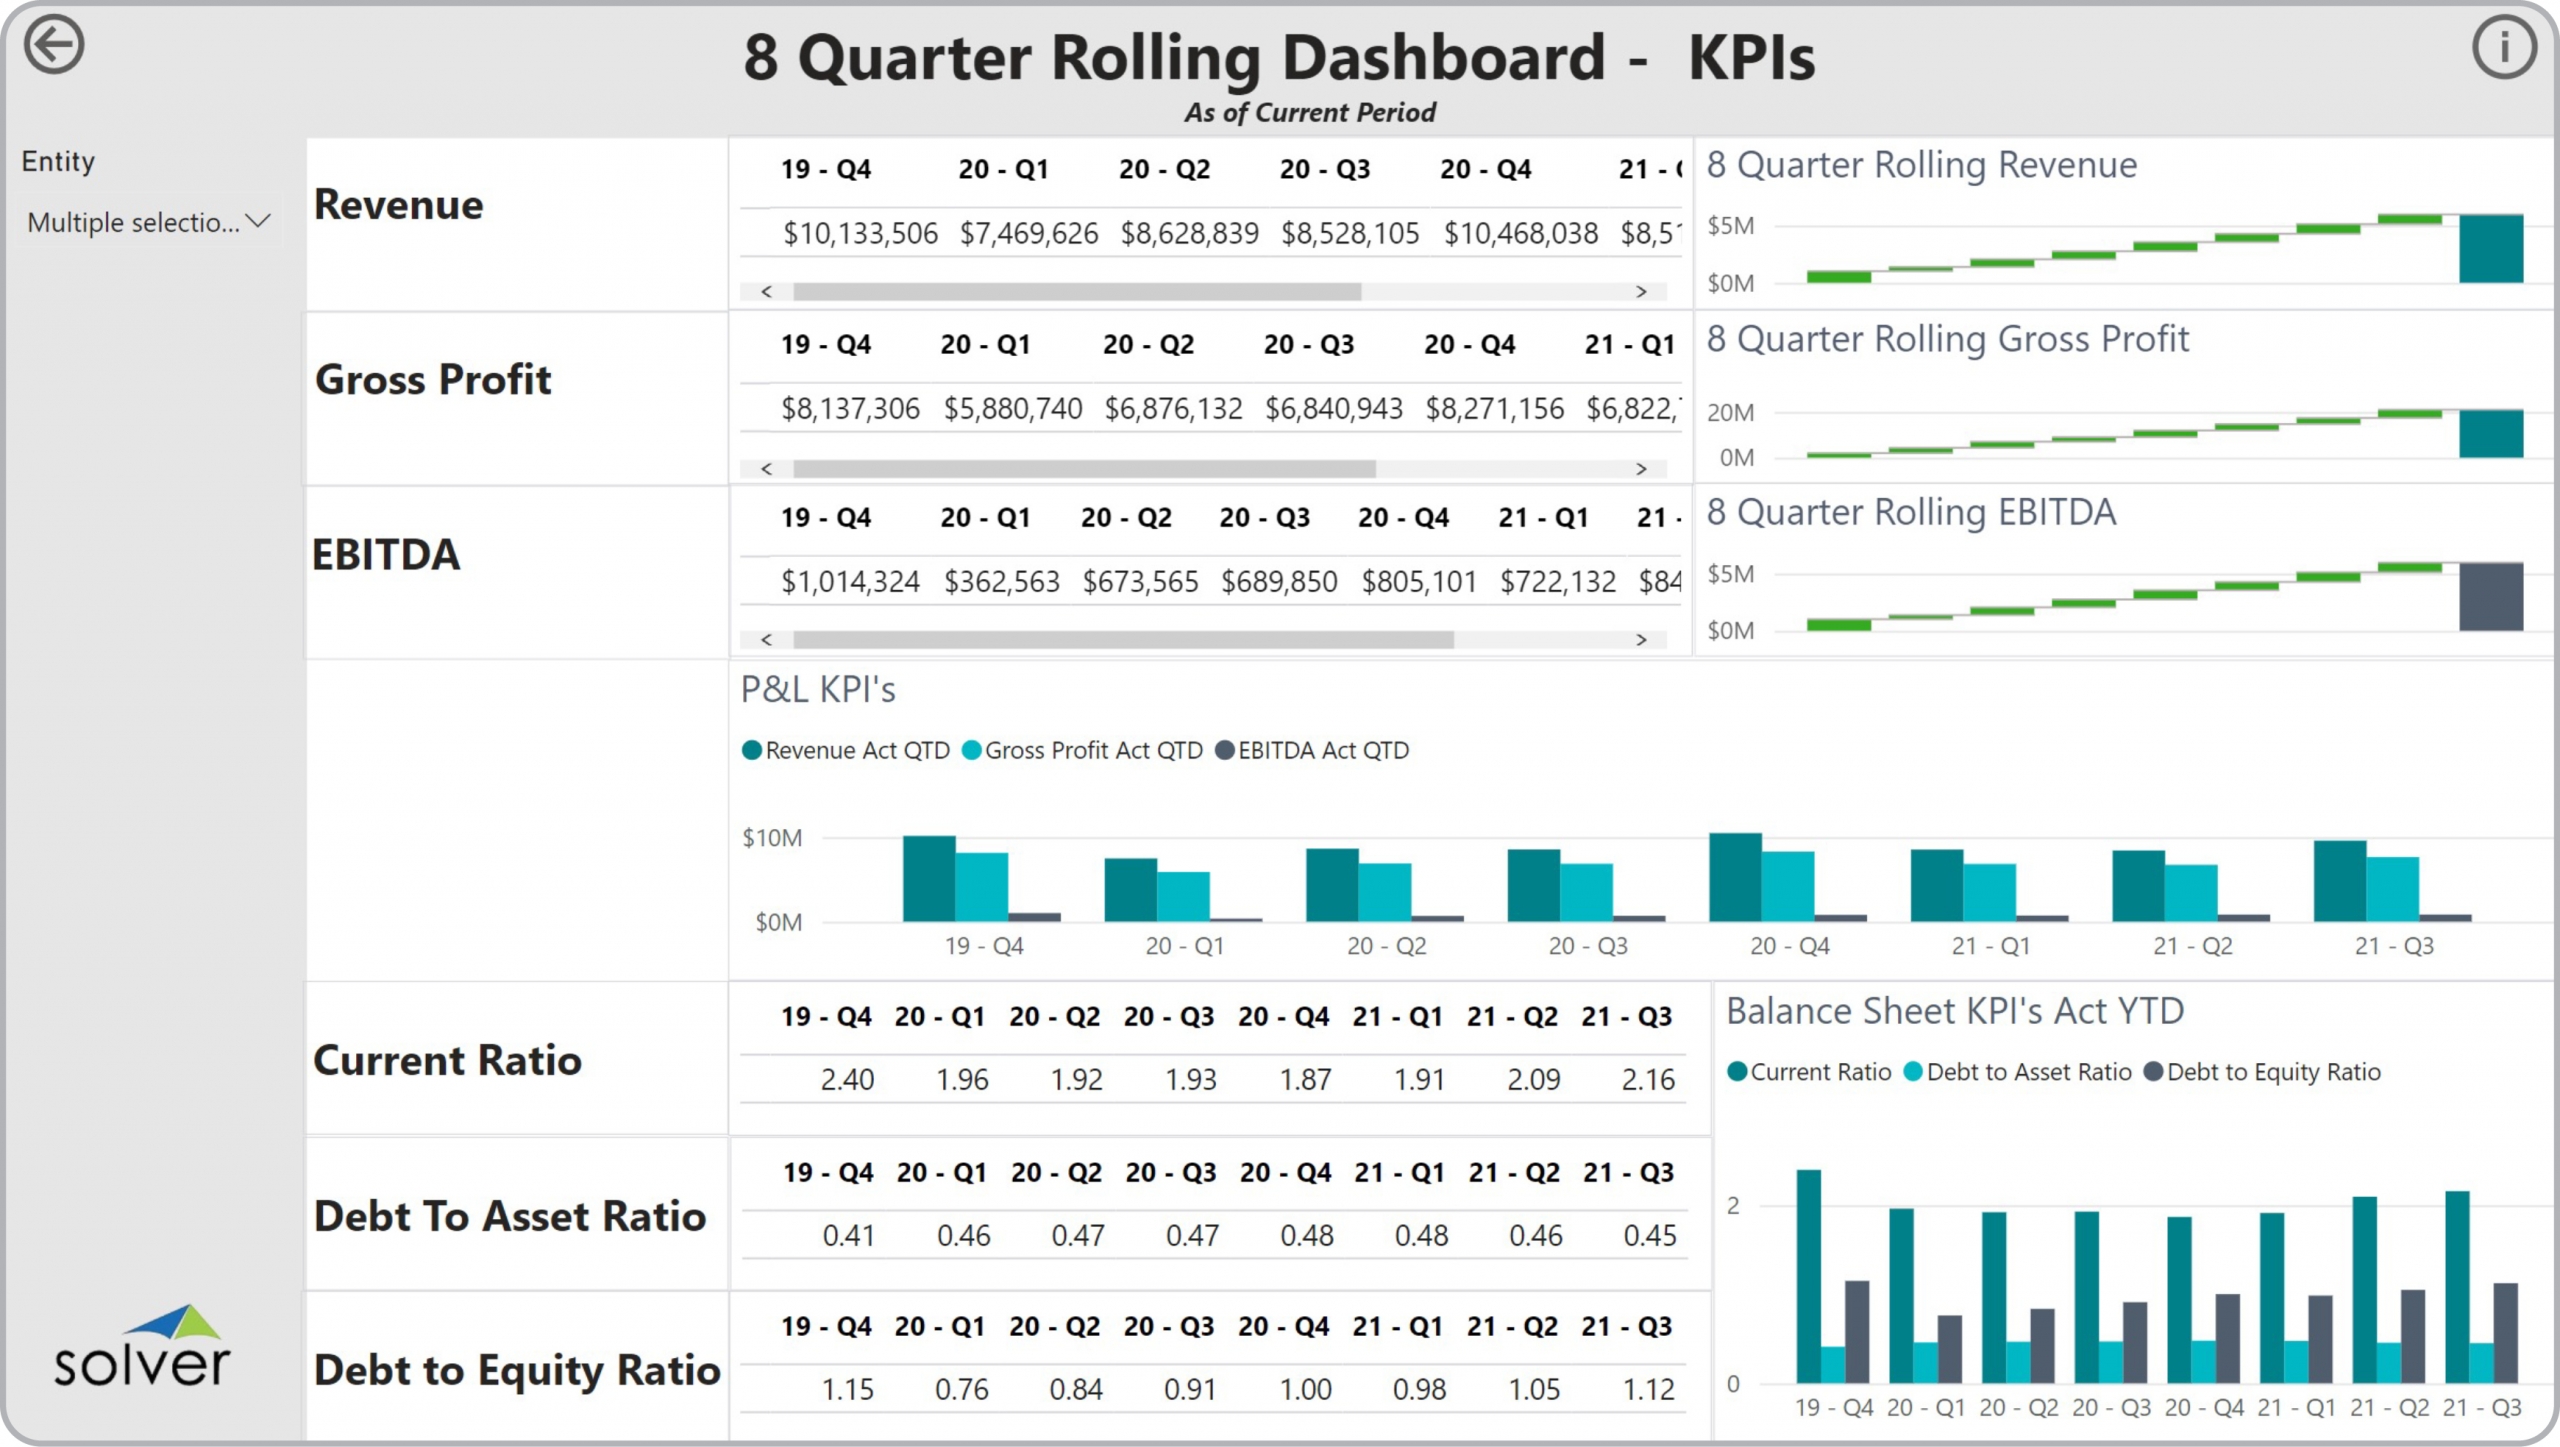 Example of an 8 Quarter Rolling KPI Dashboard to Streamline the Monthly Reporting Process